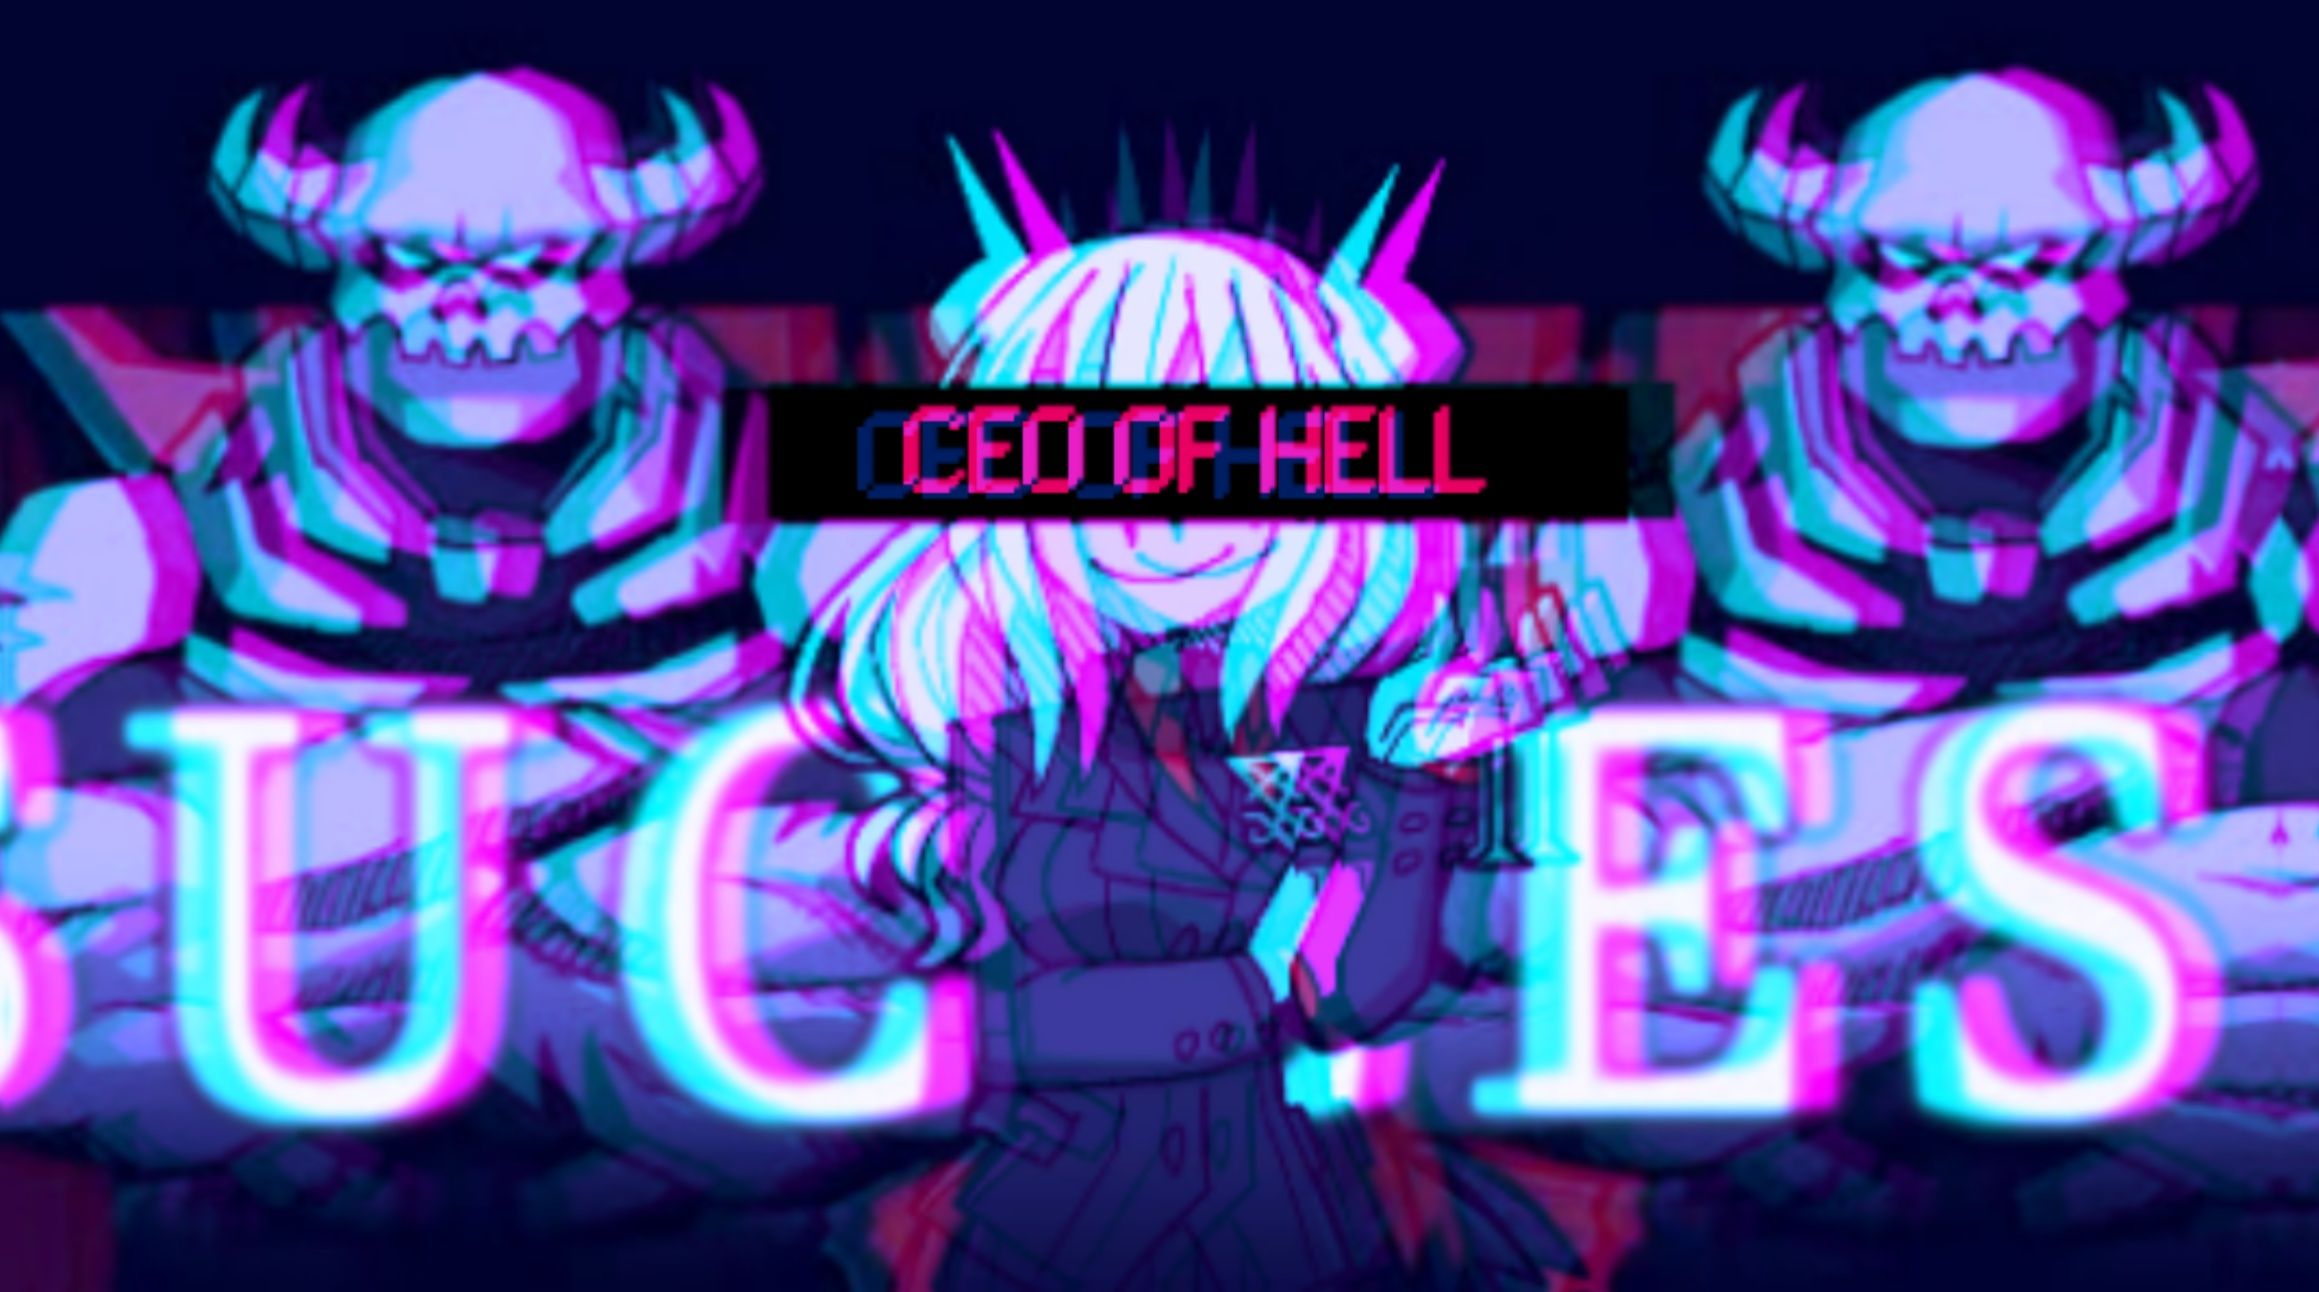 Ceo of Hell!! Glitch wallpaper